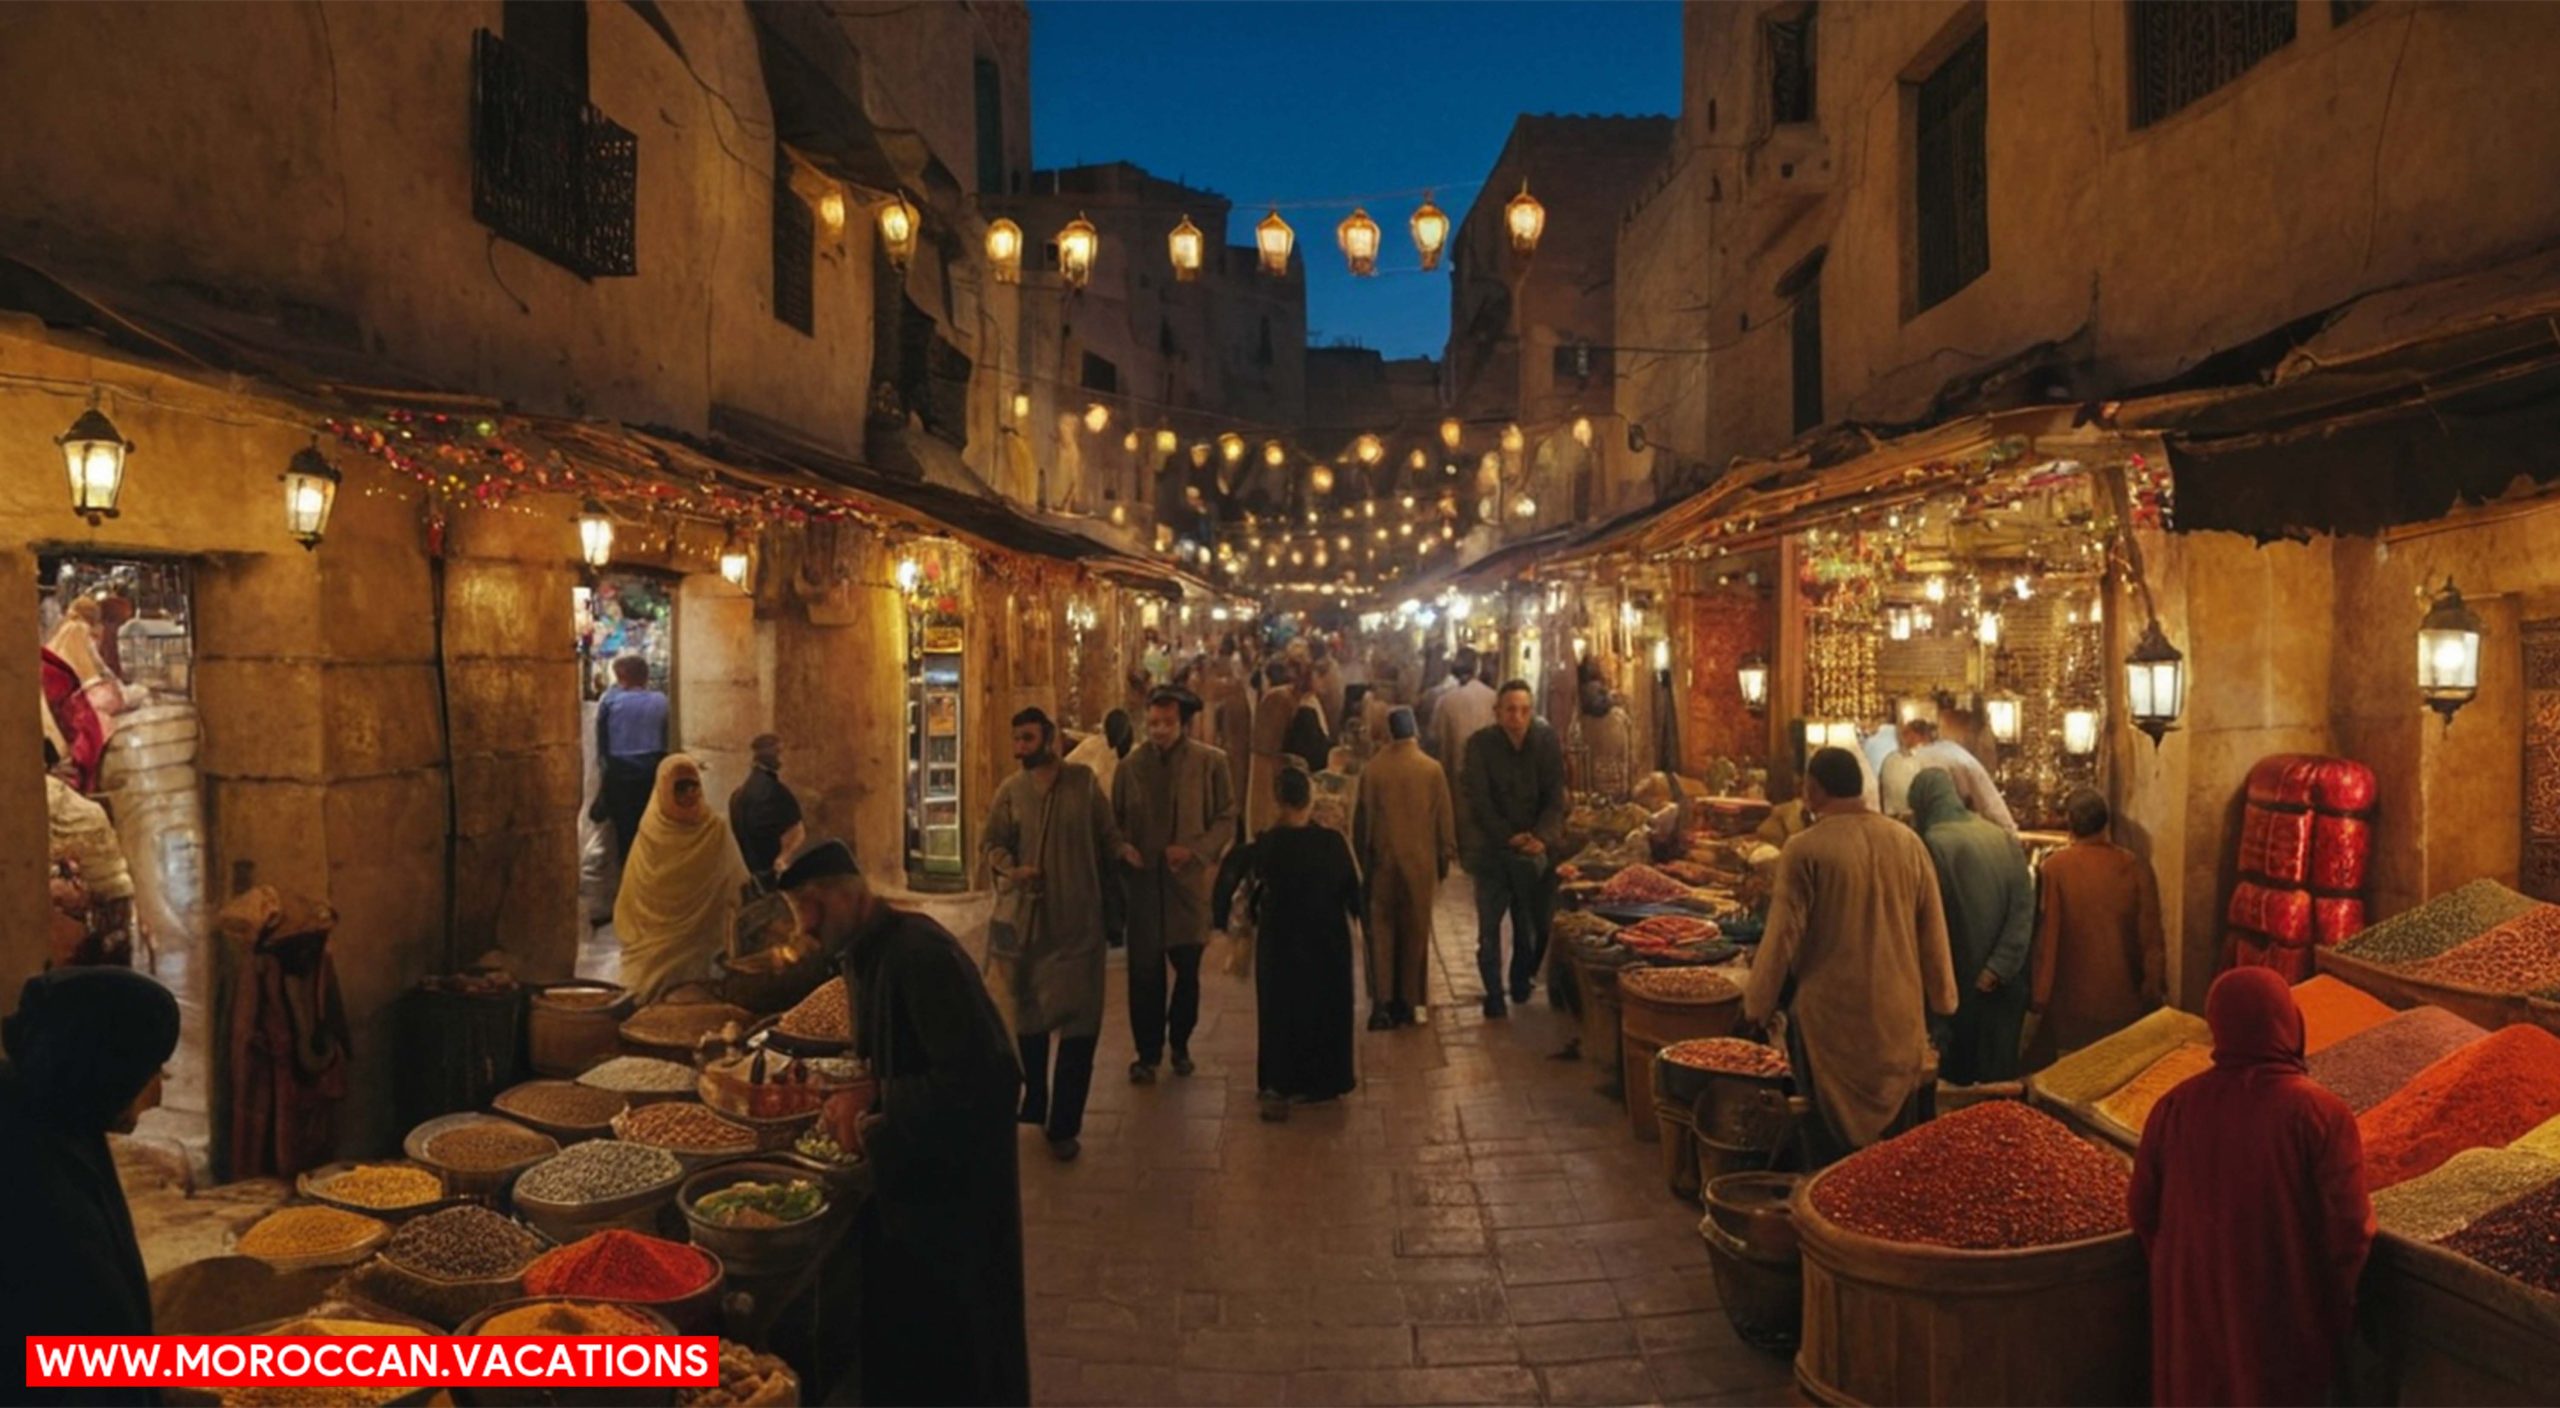 An image capturing bustling souks in Fez Medina, with stalls brimming with colorful spices.